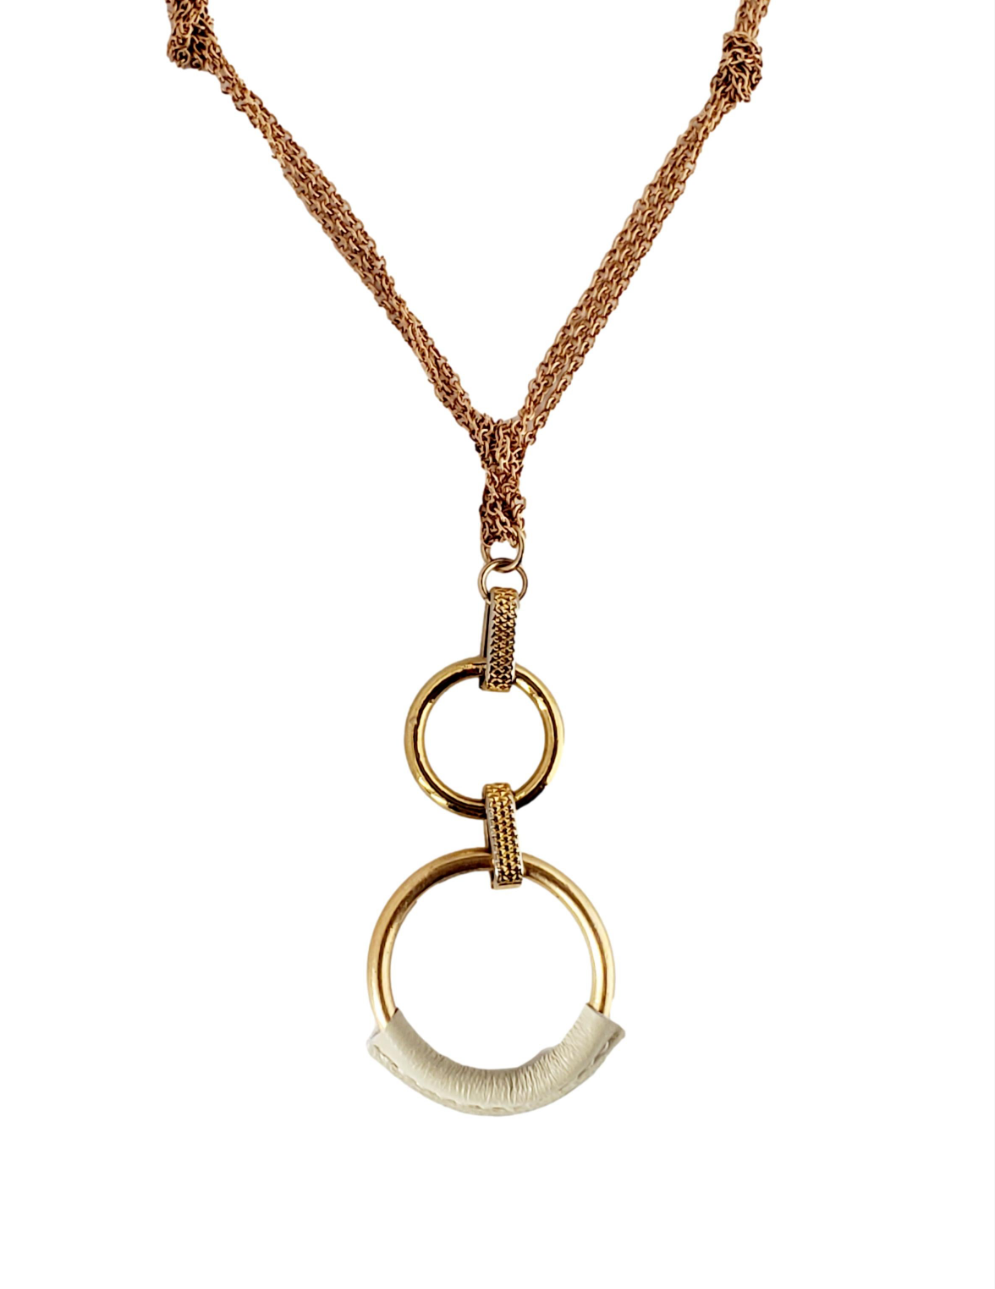 Women's Gold Tone Chain Necklace with Eternity Circle Pendant Wrapped in Gray Leather